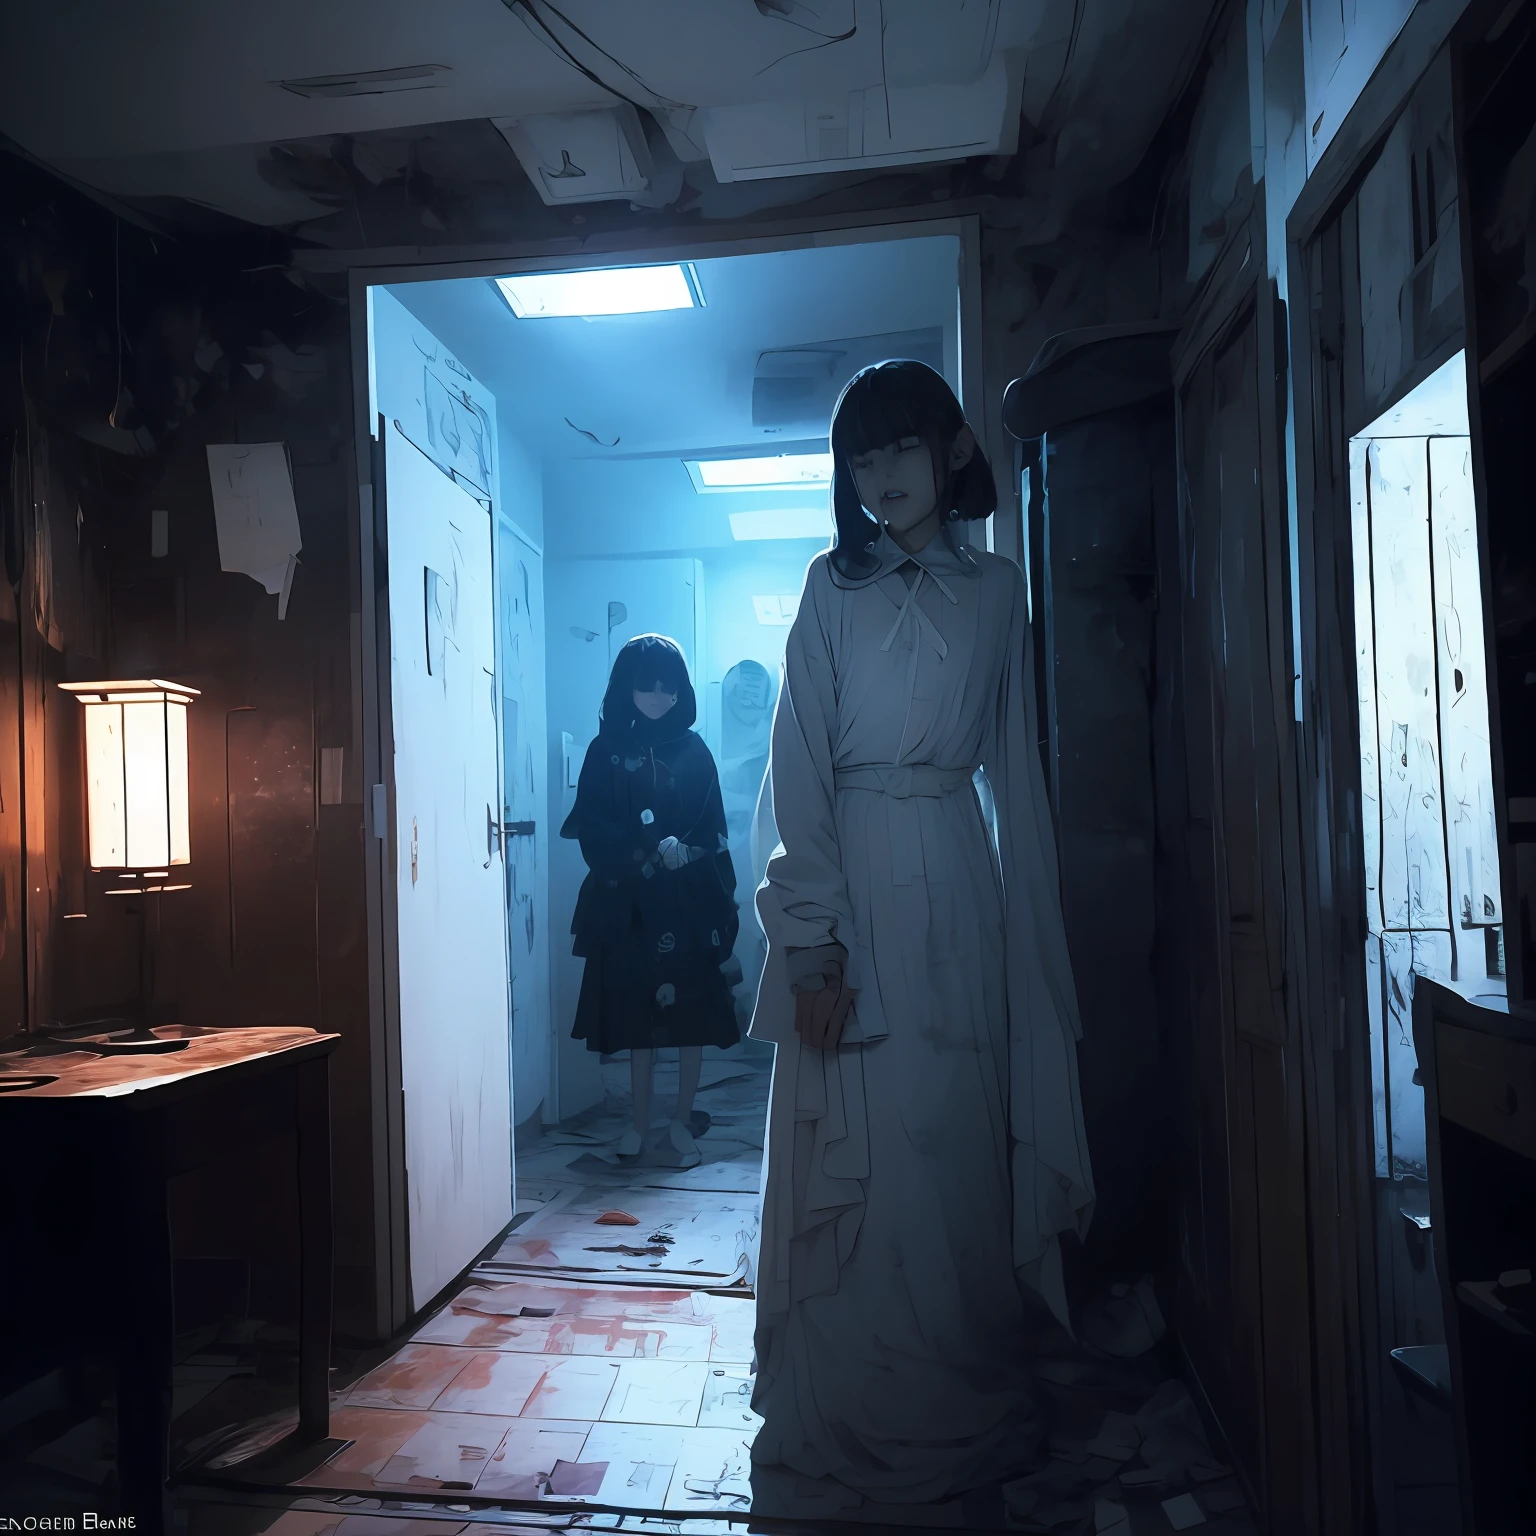 A Photo of an alone Japanese teen girl ghost. In the dimly lit, claustrophobic confines of a small room in Tokyo, a ghostly presence emerges, consumed by the macabre world of a horror game. It lurks in a desolate corner, shrouded in impenetrable darkness, its malevolent gaze fixed upon the player with an unnerving and twisted smile that sends shivers down the spine. The ghostly apparition is draped in a tattered, filth-ridden white dress, a haunting relic of the past, and its ethereal form wavers, revealing glimpses of the spectral realm beyond.

Within the room's suffocating atmosphere, a dilapidated chair, a forgotten relic from another era, stands as a chilling reminder of the room's sinister history. Time has eroded its once ornate carvings, leaving behind a decaying shell that echoes with the anguished whispers of souls long departed. The walls, adorned with faded photographs of forgotten faces, seem to exude a mournful presence, as if the very essence of those captured within yearns for release from their eternal purgatory.

A pale blue luminescence emanates from the ghost's eyes, casting an eerie glow that permeates the air, suffusing every corner of the room with a spectral incandescence. Shadows dance and contort under the ethereal radiance, twisting into grotesque forms that mock the sanity of the living.

As the ghost silently extends its translucent hand, a bone-chilling stillness descends. With each agonizingly slow movement, it inches closer to the player, a creeping specter of doom. But no matter how near it draws, the ghost's transparent hand never breaches the threshold of the tangible world, leaving a trail of icy dread in its wake. It is an embodiment of torment, forever denied the solace of human touch.

Yet, paradoxically, amidst the palpable terror